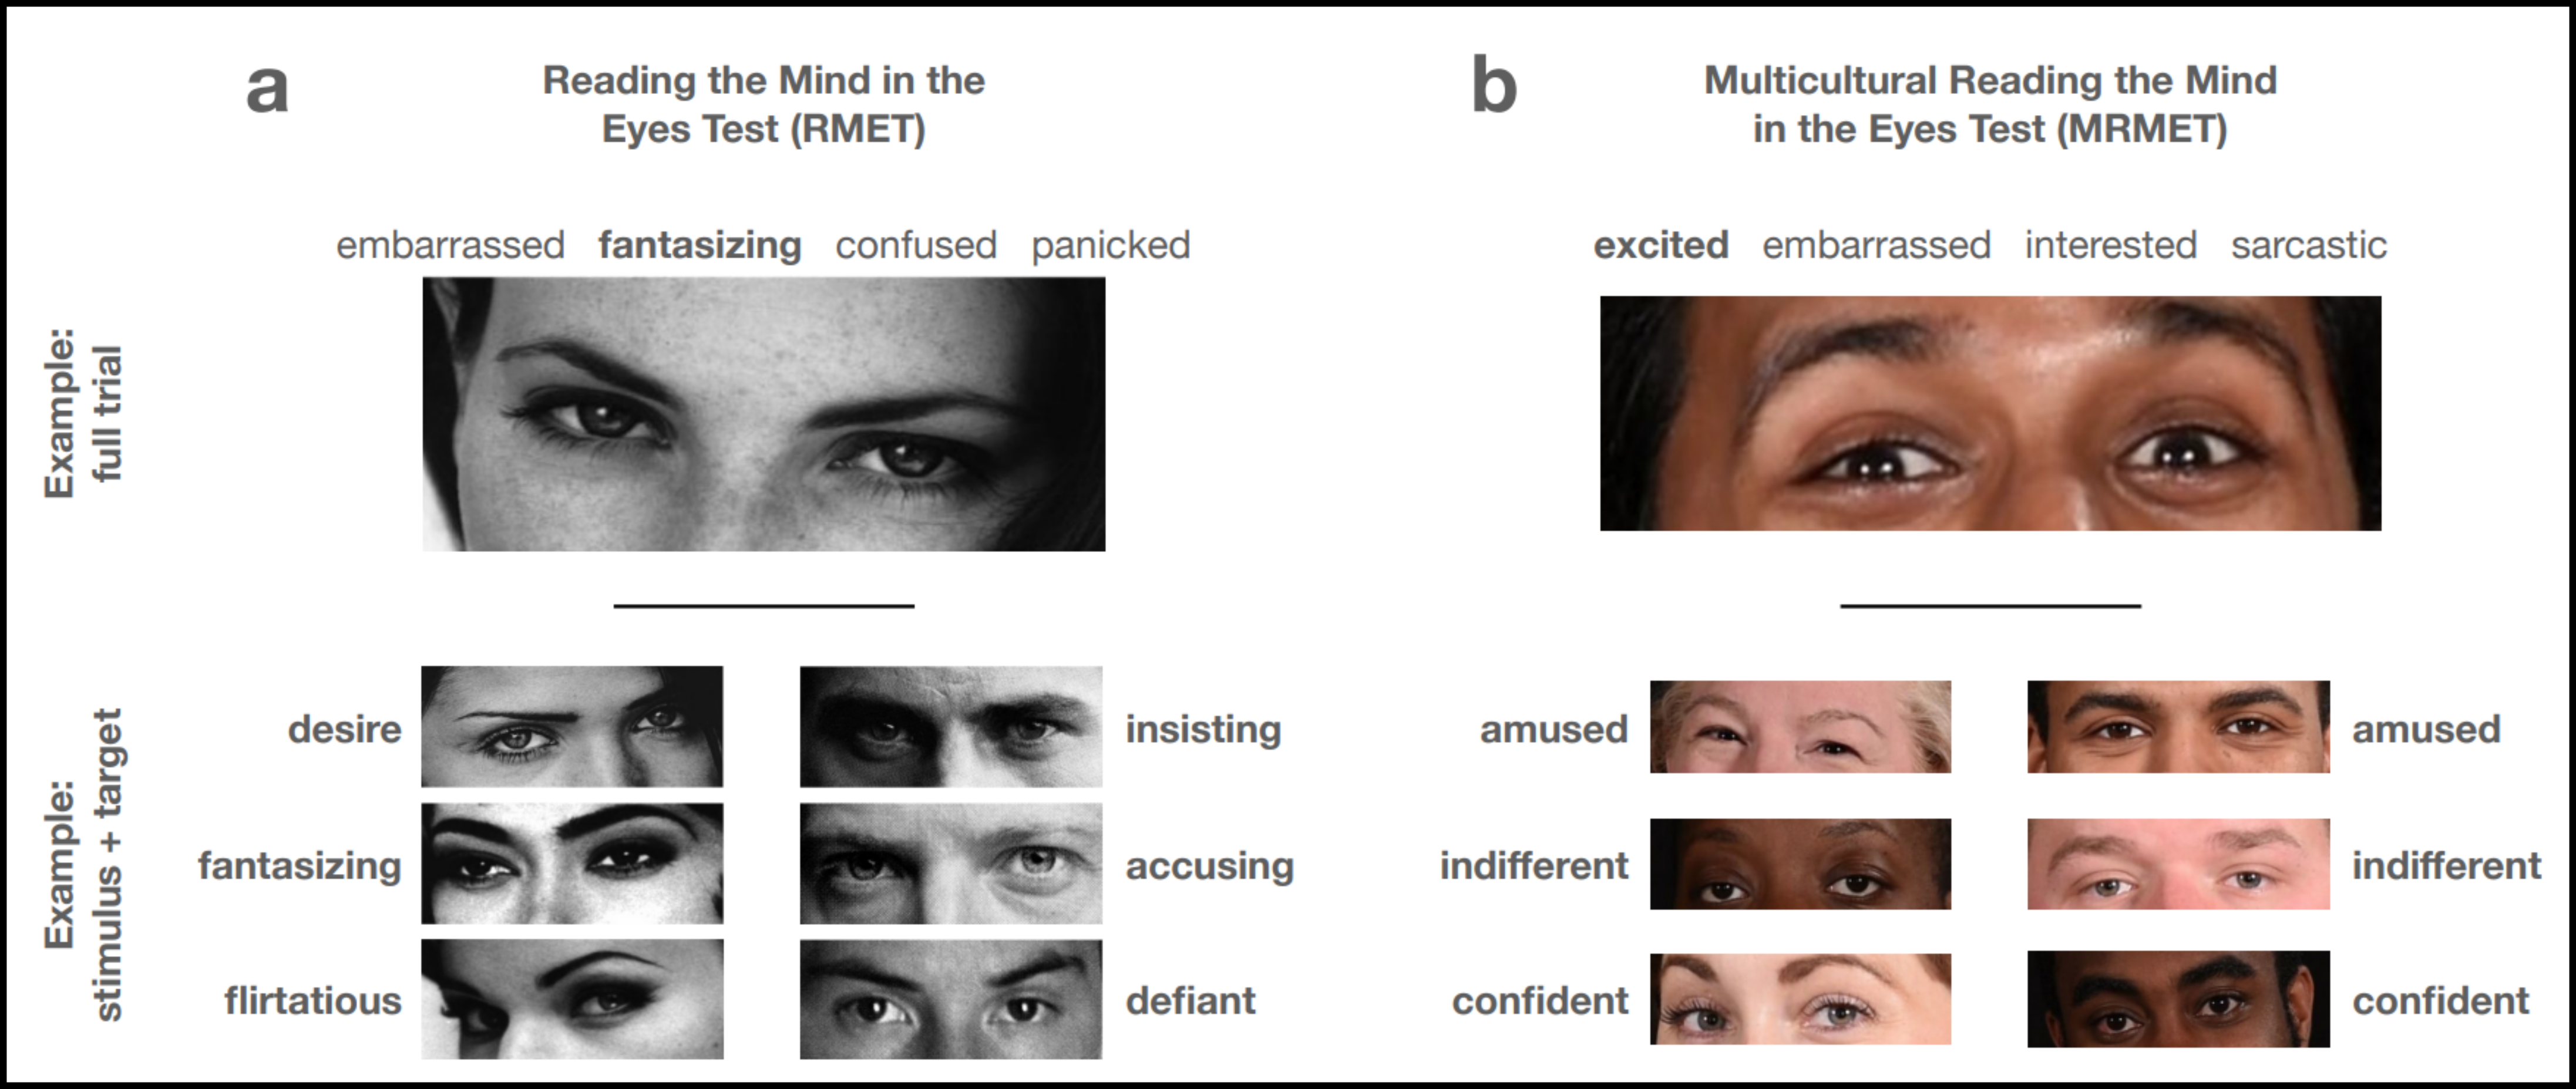 The leftmost column of this figure includes example stimuli (grayscale photos of people’s eyes) from the original RMET measure as well as potential response options for the emotional state of that person including “embarrassed” “fantasizing” “confused” and “panicked.” The rightmost column of this figure includes the stimuli and response options for the updated MRMET measure which highlights the racial diversity of the people as well as the reduced vocabulary level of the response options, which are: “excited” “embarrassed” “interested” and “sarcastic.”